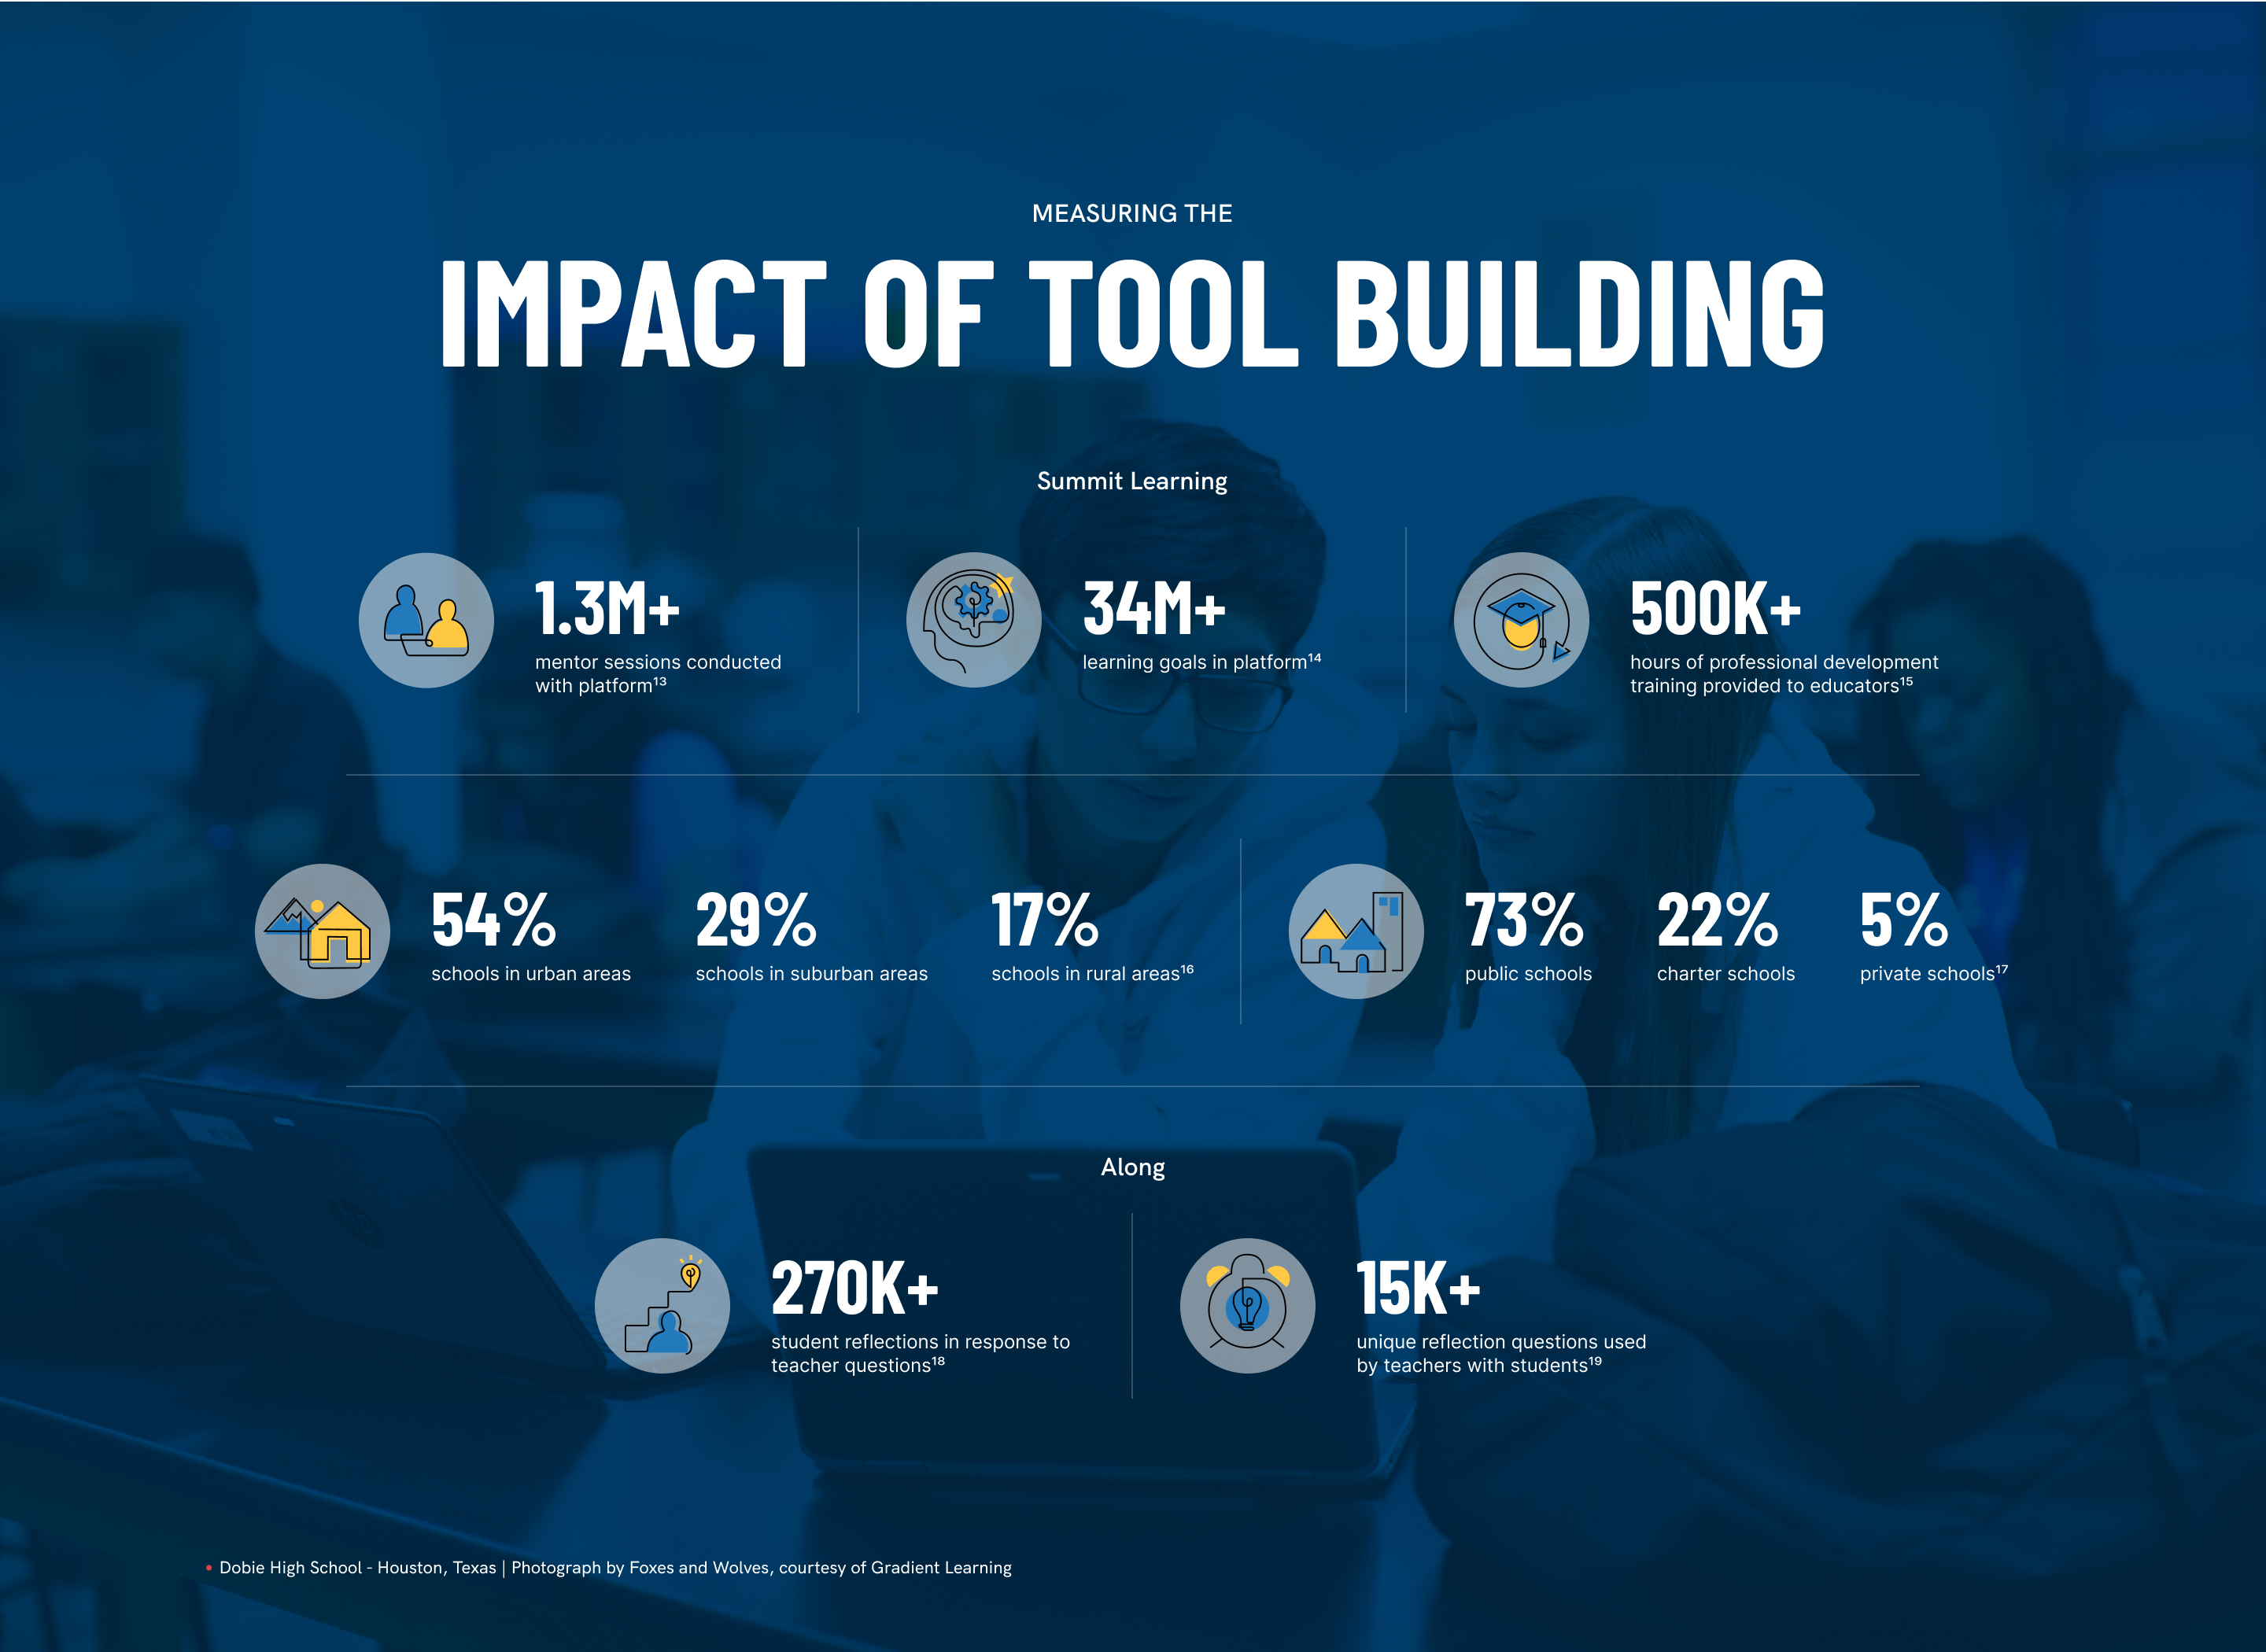 Infographic - Measuring the Impact of Tool Building. Summit Learning has conducted over 1.3 million mentor sessions with over 34 million learning goals and over 500 thousand hours of professional development training provided to educators through the platform. Usage: 54% in urban schools, 29% in suburban schools and 17% in rural areas, out of which 73% are public, 22% charter and 5% private schools. Along has garnered over 270 thousand student reflections in response to teacher questions with over 15 thousand being unique reflection questions.